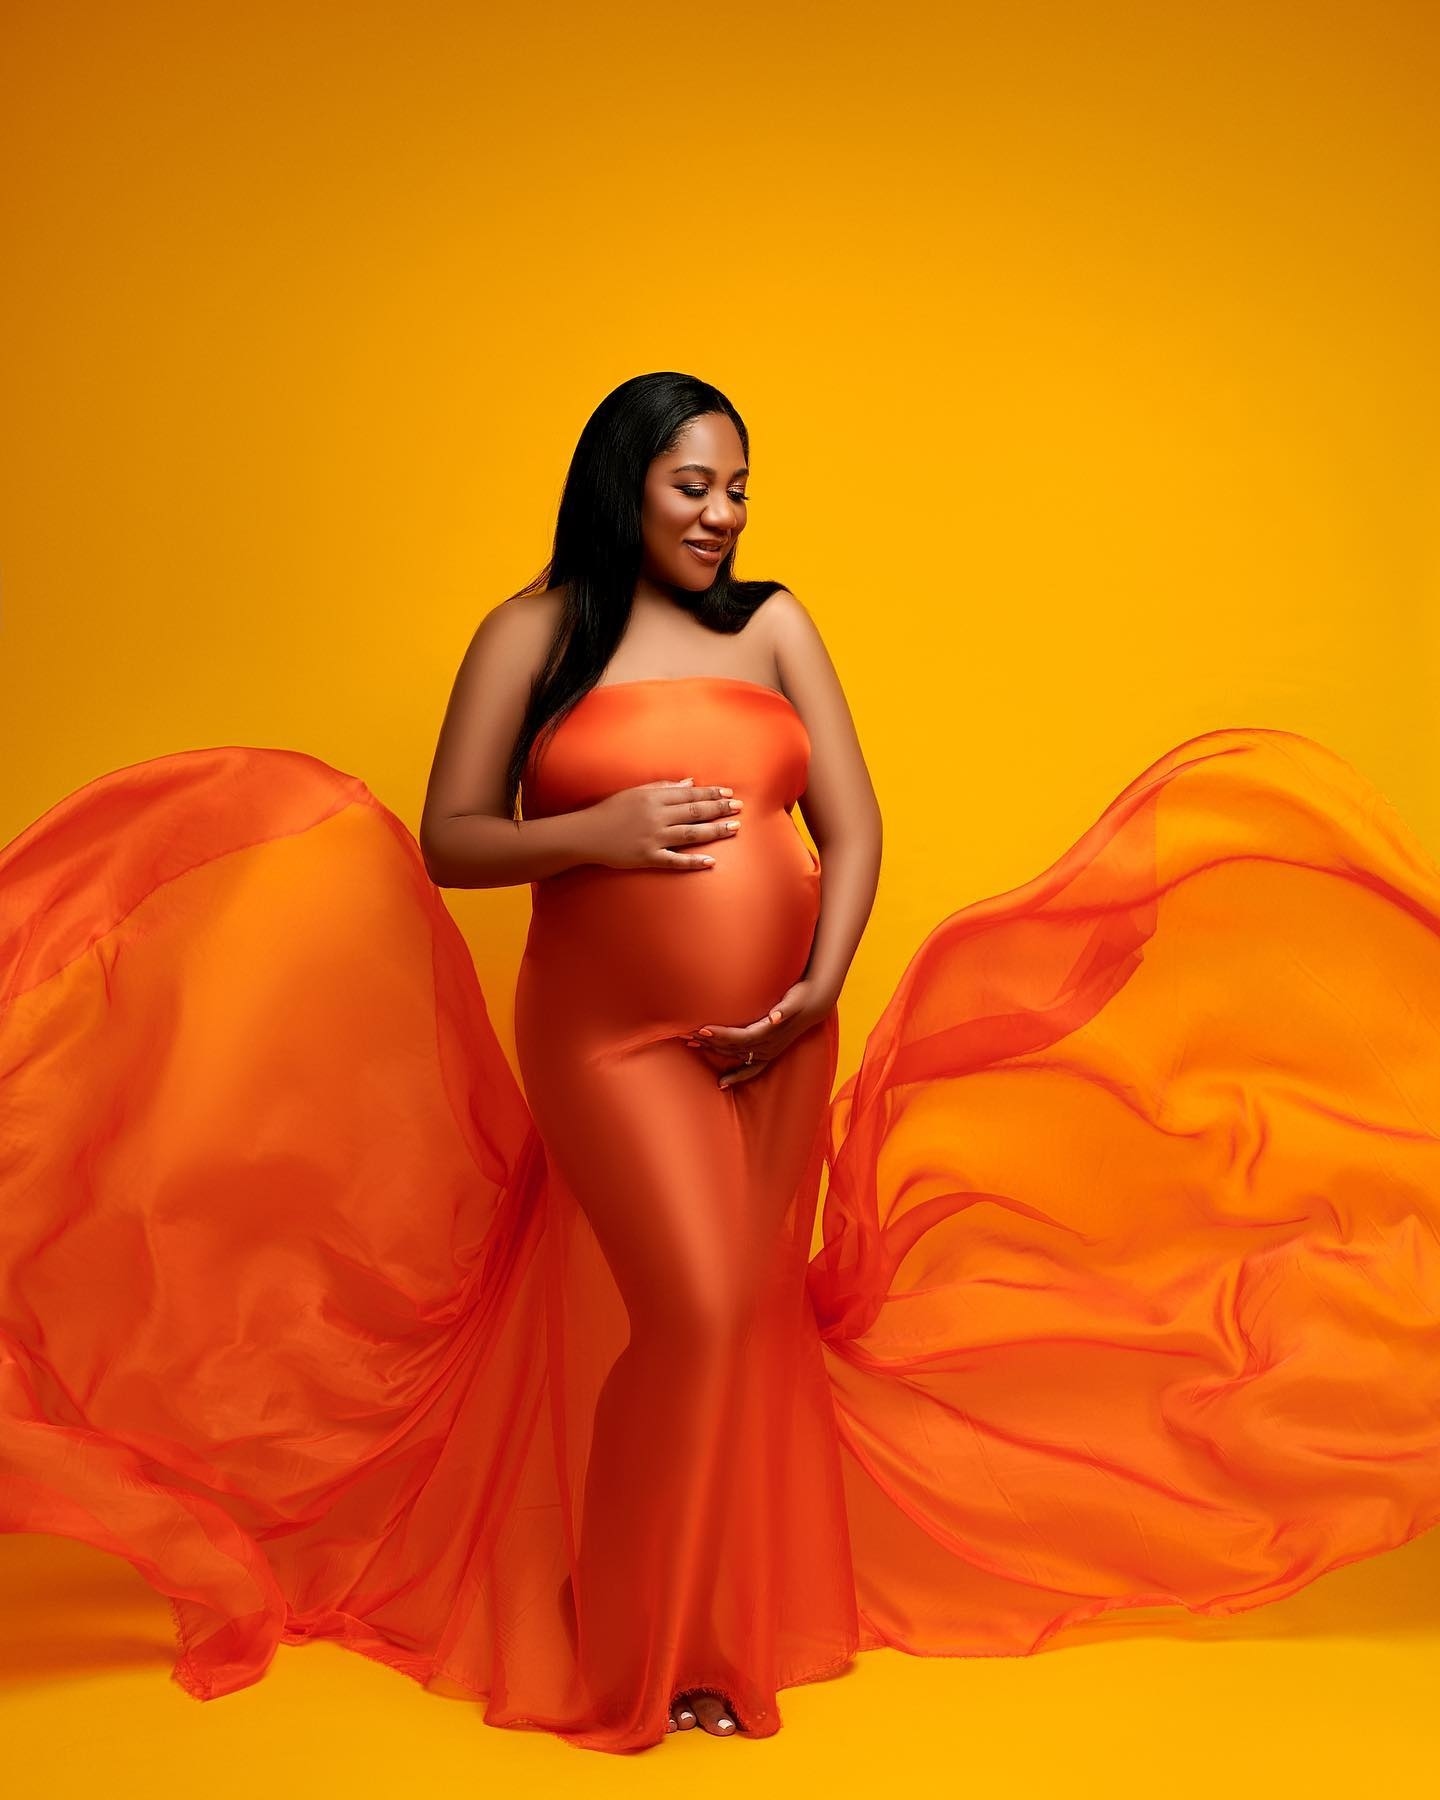 Bright and beautiful! ⁠
⁠
#repost  @gricelsphotography ⁠
⁠
Summer vibes 🧡💛⁠
⁠
Makeup by @vanessa_rizzo ⁠
Backdrop: @savageuniversal ⁠
Lighting: @paulcbuffinc ⁠
Fabric: @before.and.ever ⁠
⁠
⁠
#Ootd #melanin #babyfever #motherhood #blackmoms #babies #love #happy #mom #greatness #blacklove #mompreneur #millennialmoms #blackmotherhood #momlife #blackmamas #maternity #inlove #munaluchi #blessed #mombloggers #smile #munababy #mommyblog #munamommy